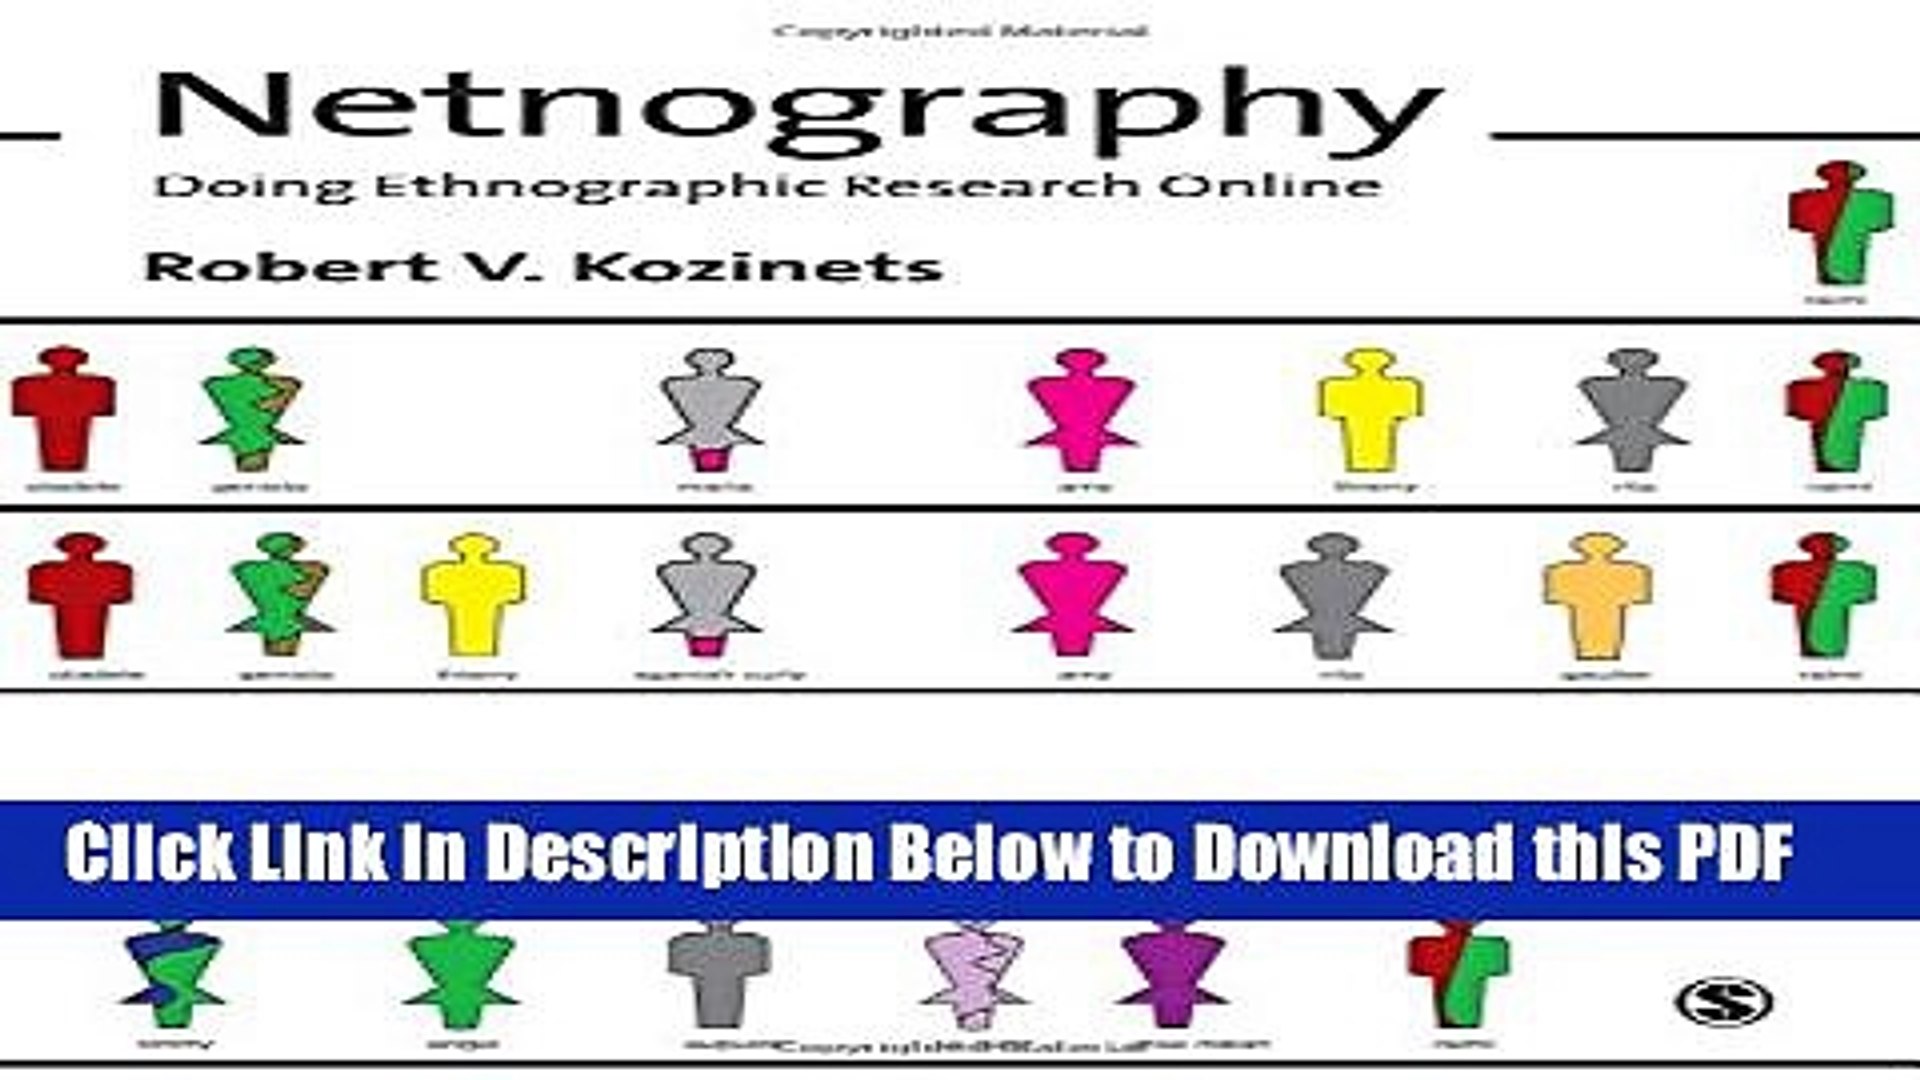 netnography doing ethnographic research online pdf